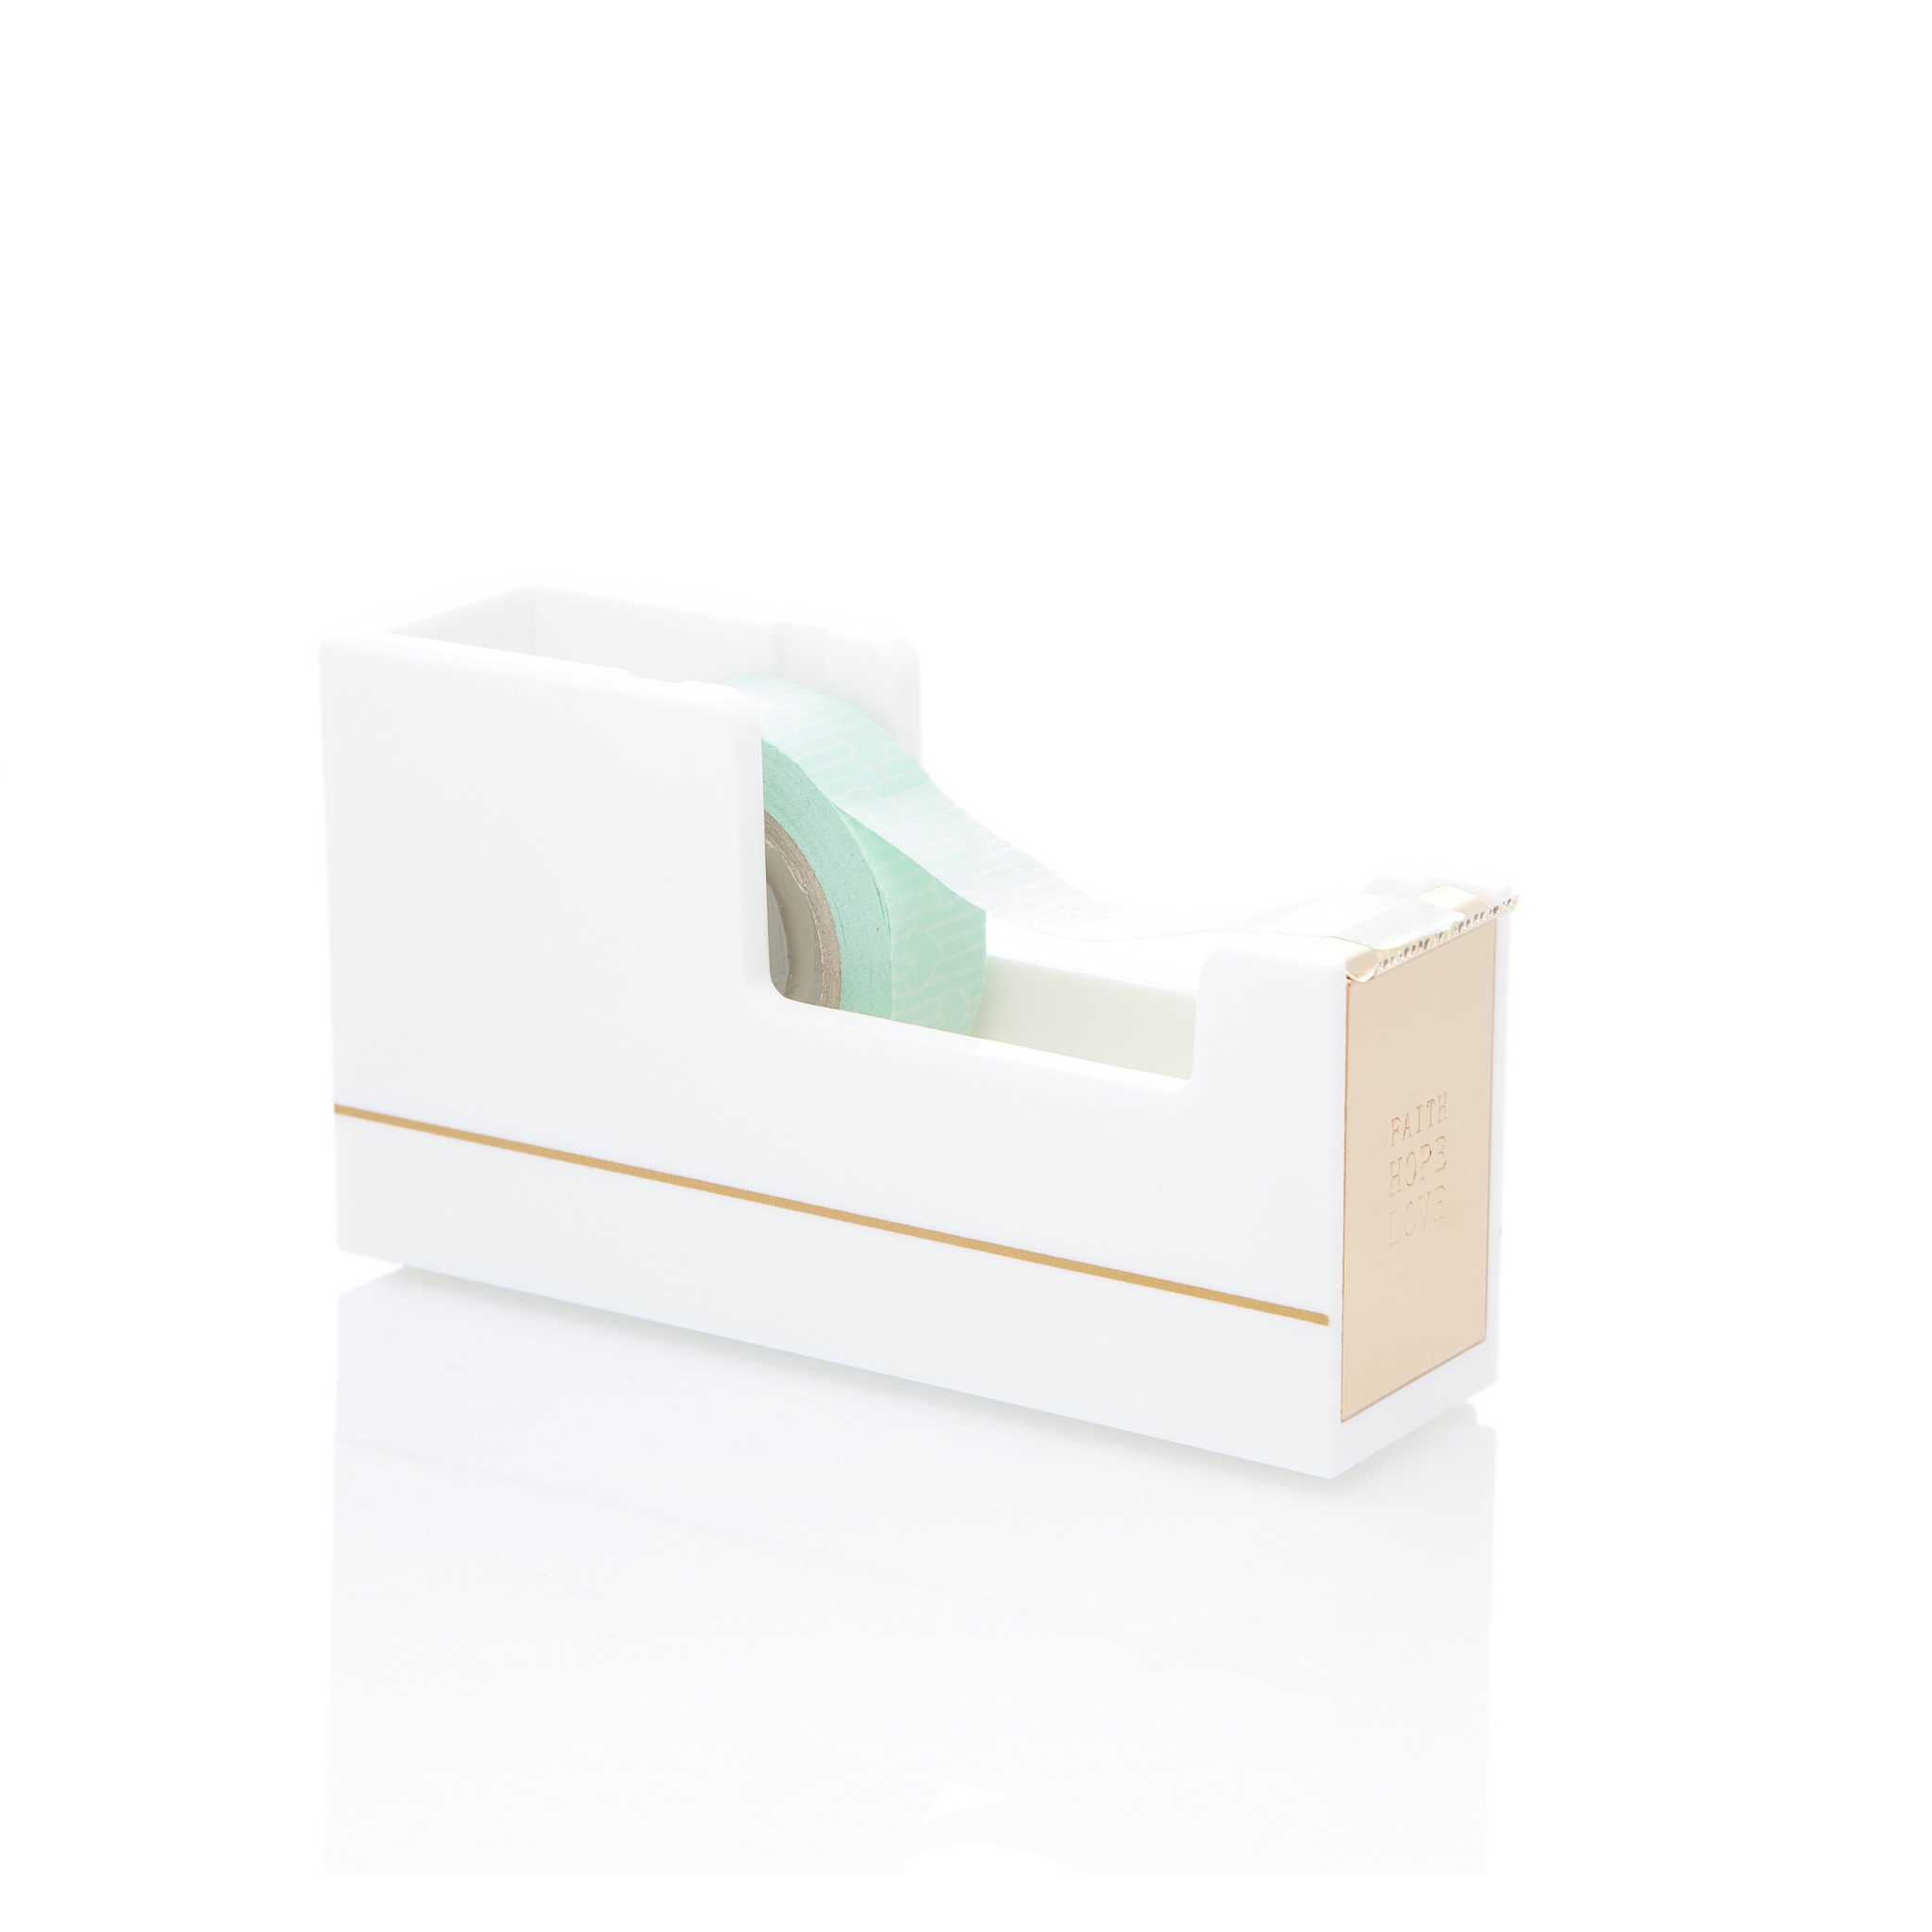 Stitches and Tweed - Tape dispenser - White - Everyday Vegan Grocer